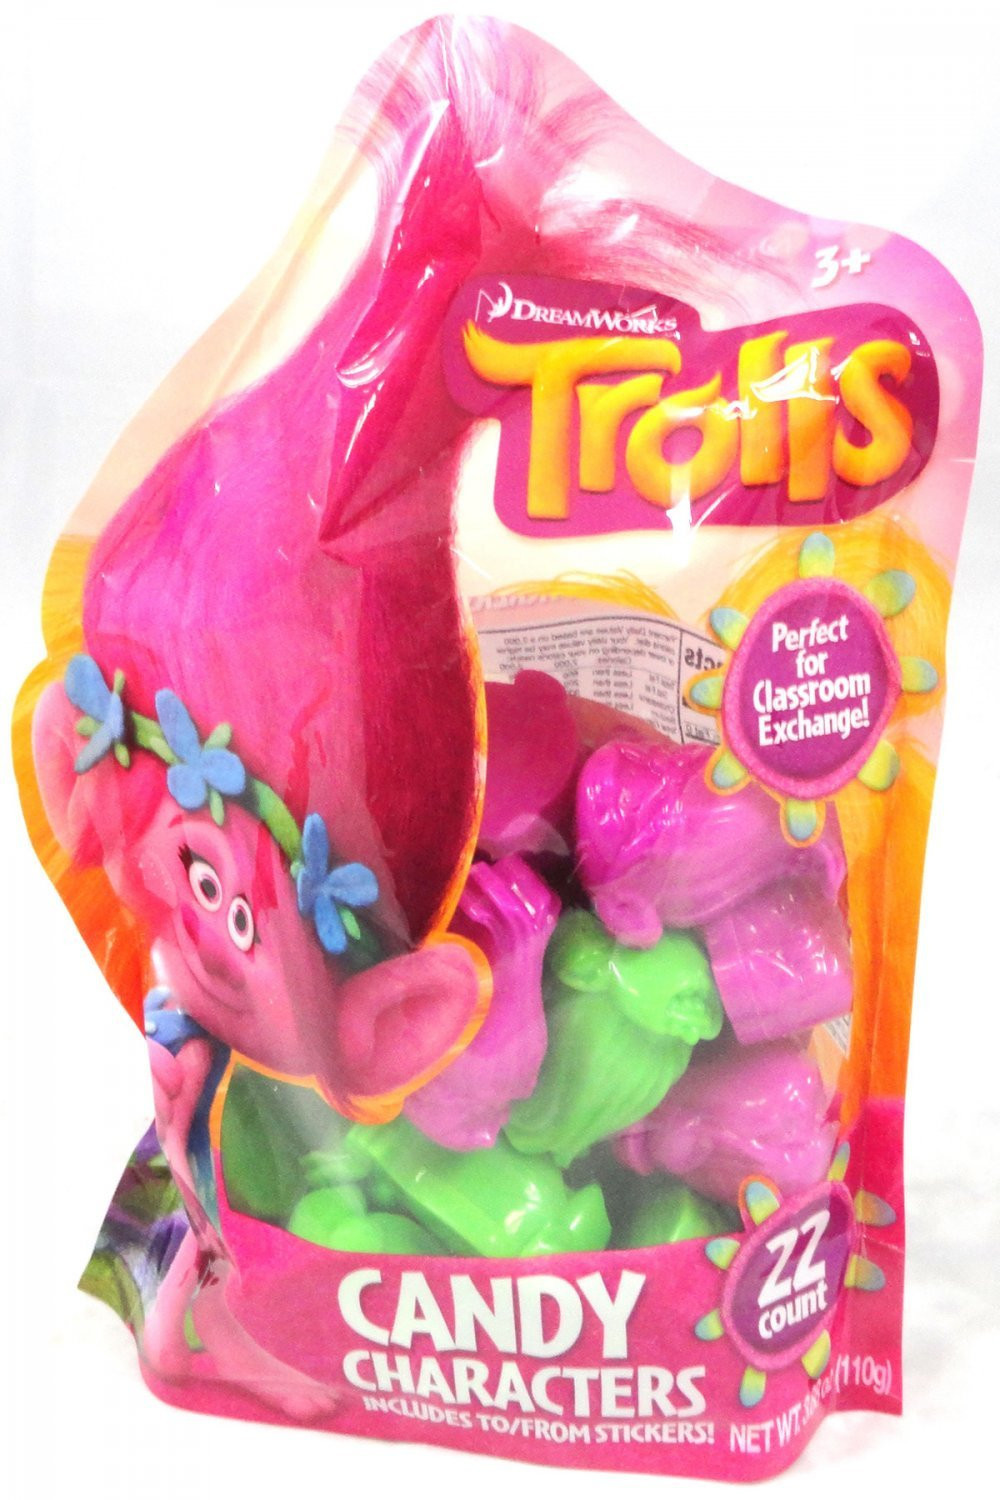  DreamWorks Trolls 22ct. Container Classroom Exchange Gusset Bag